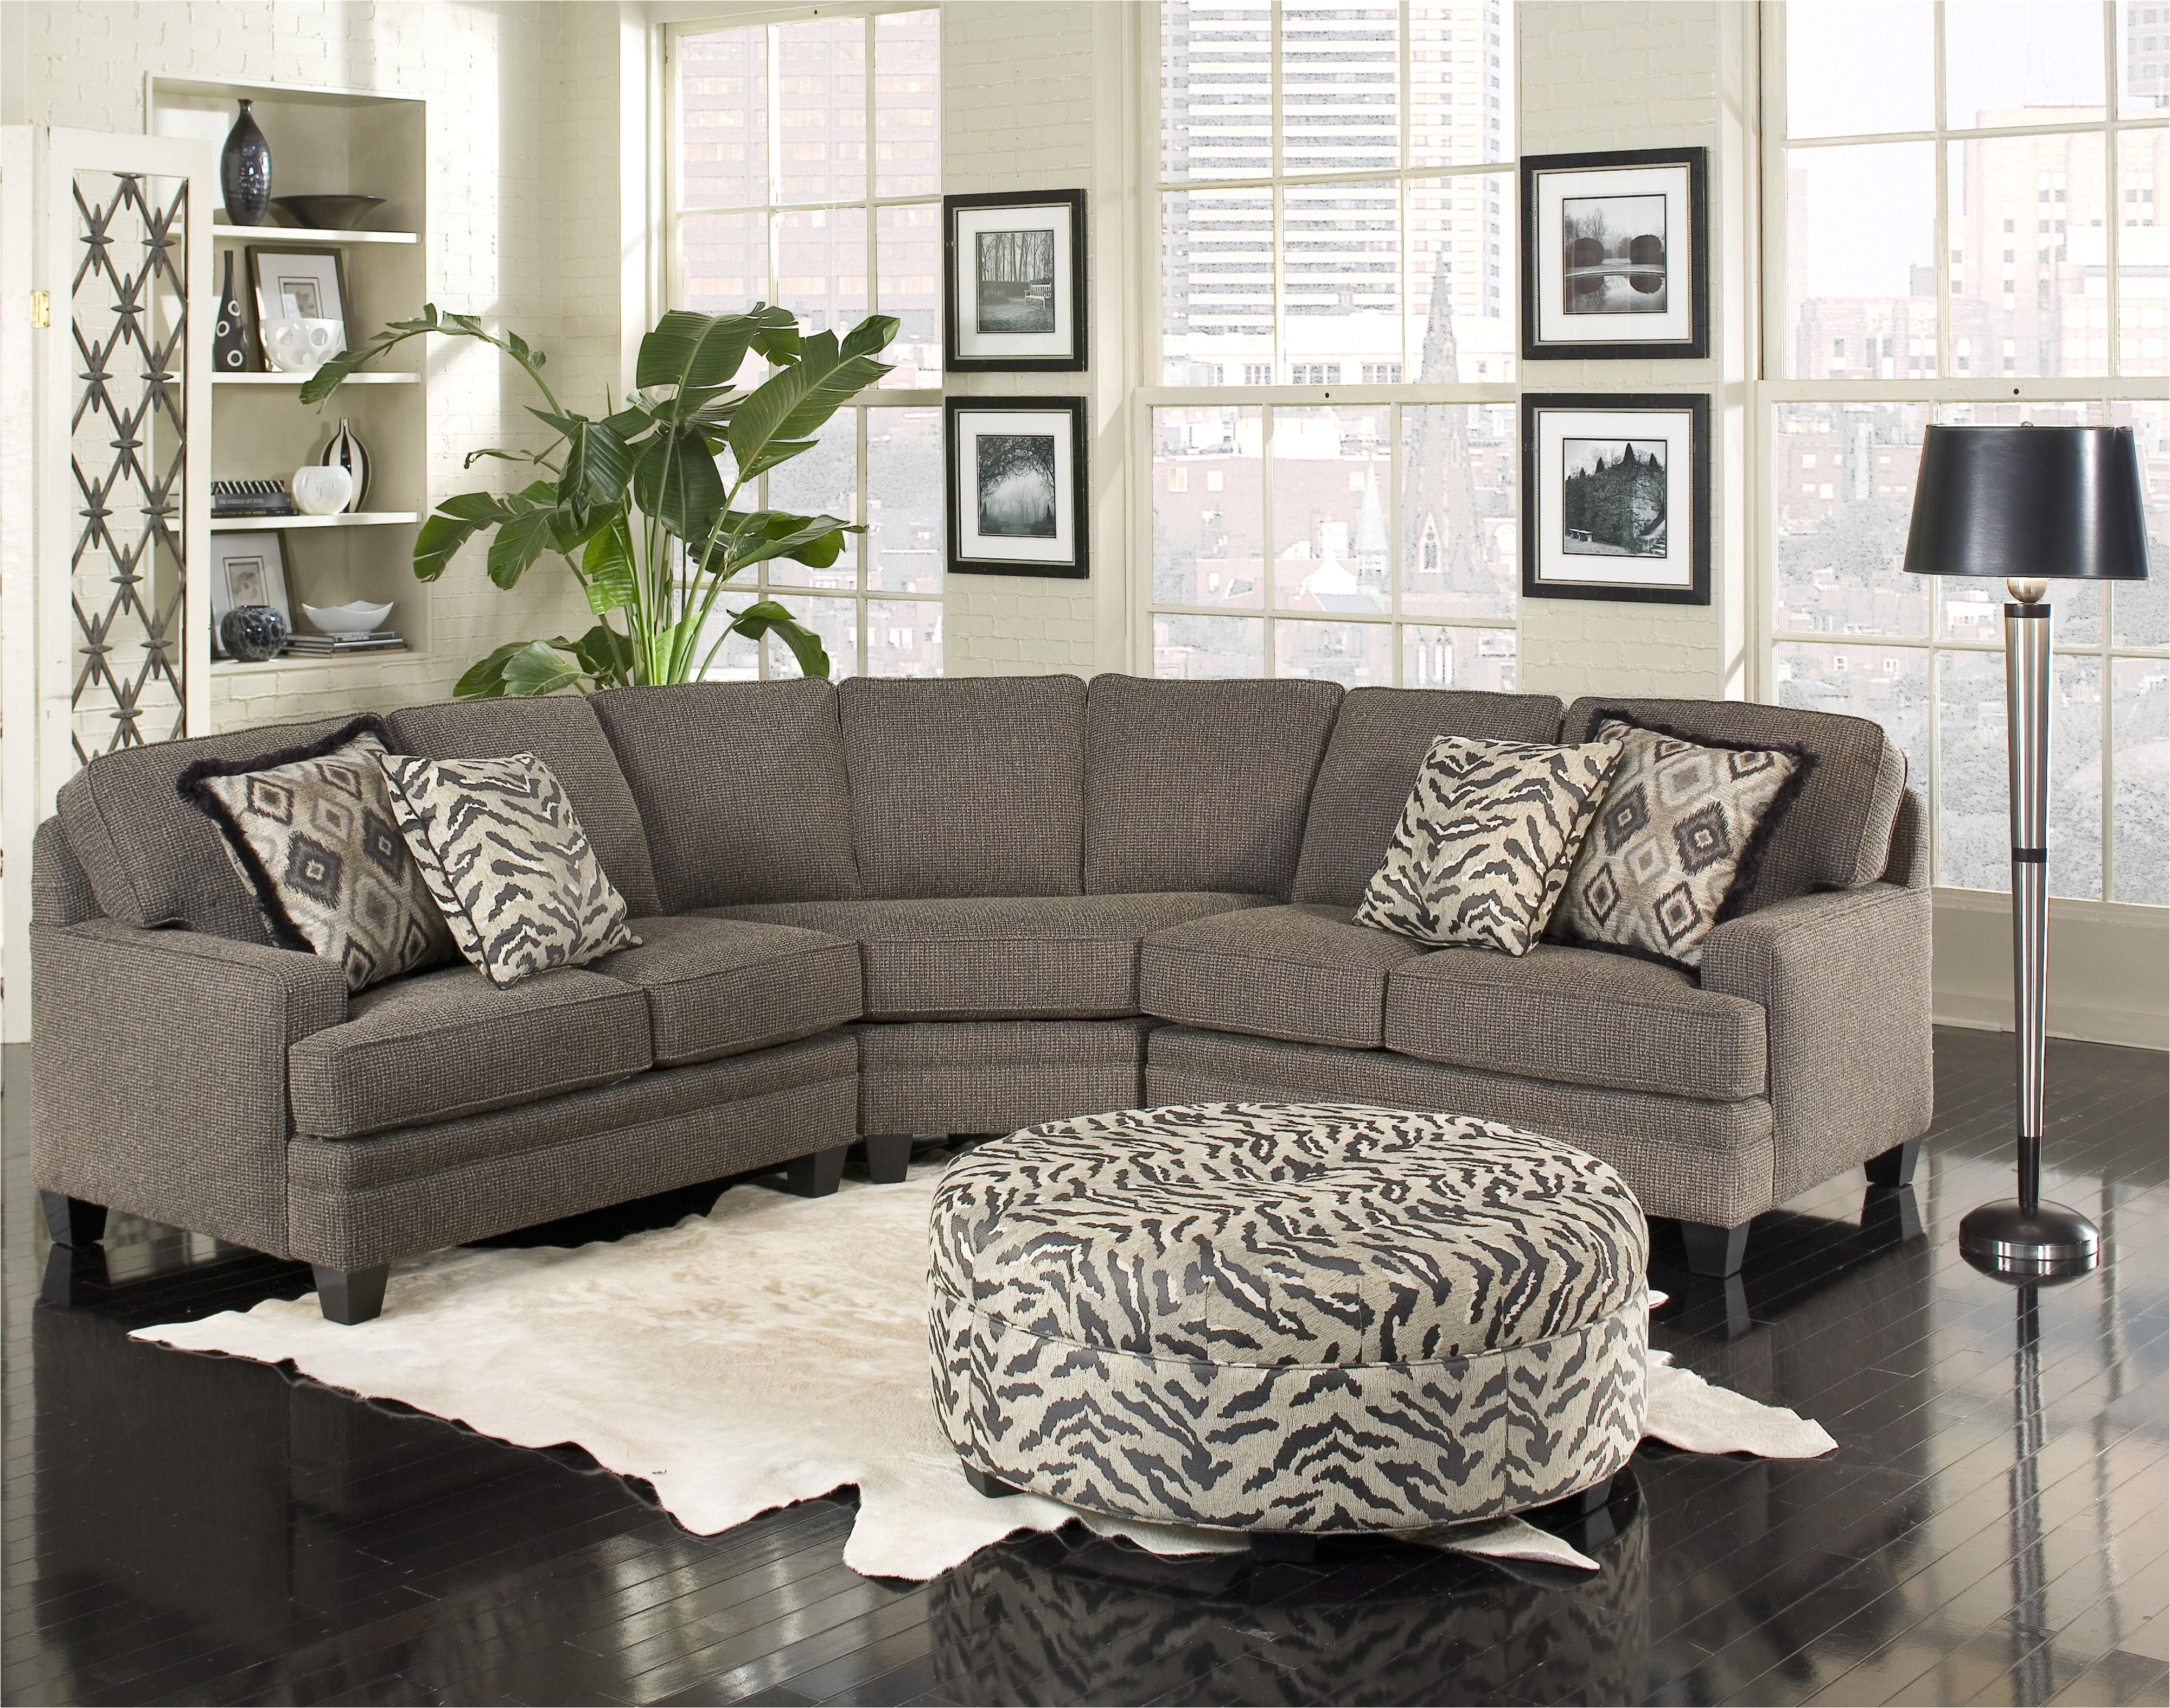 build your own 5000 series five person sectional sofa with contemporary style by smith brothers wolf furniture